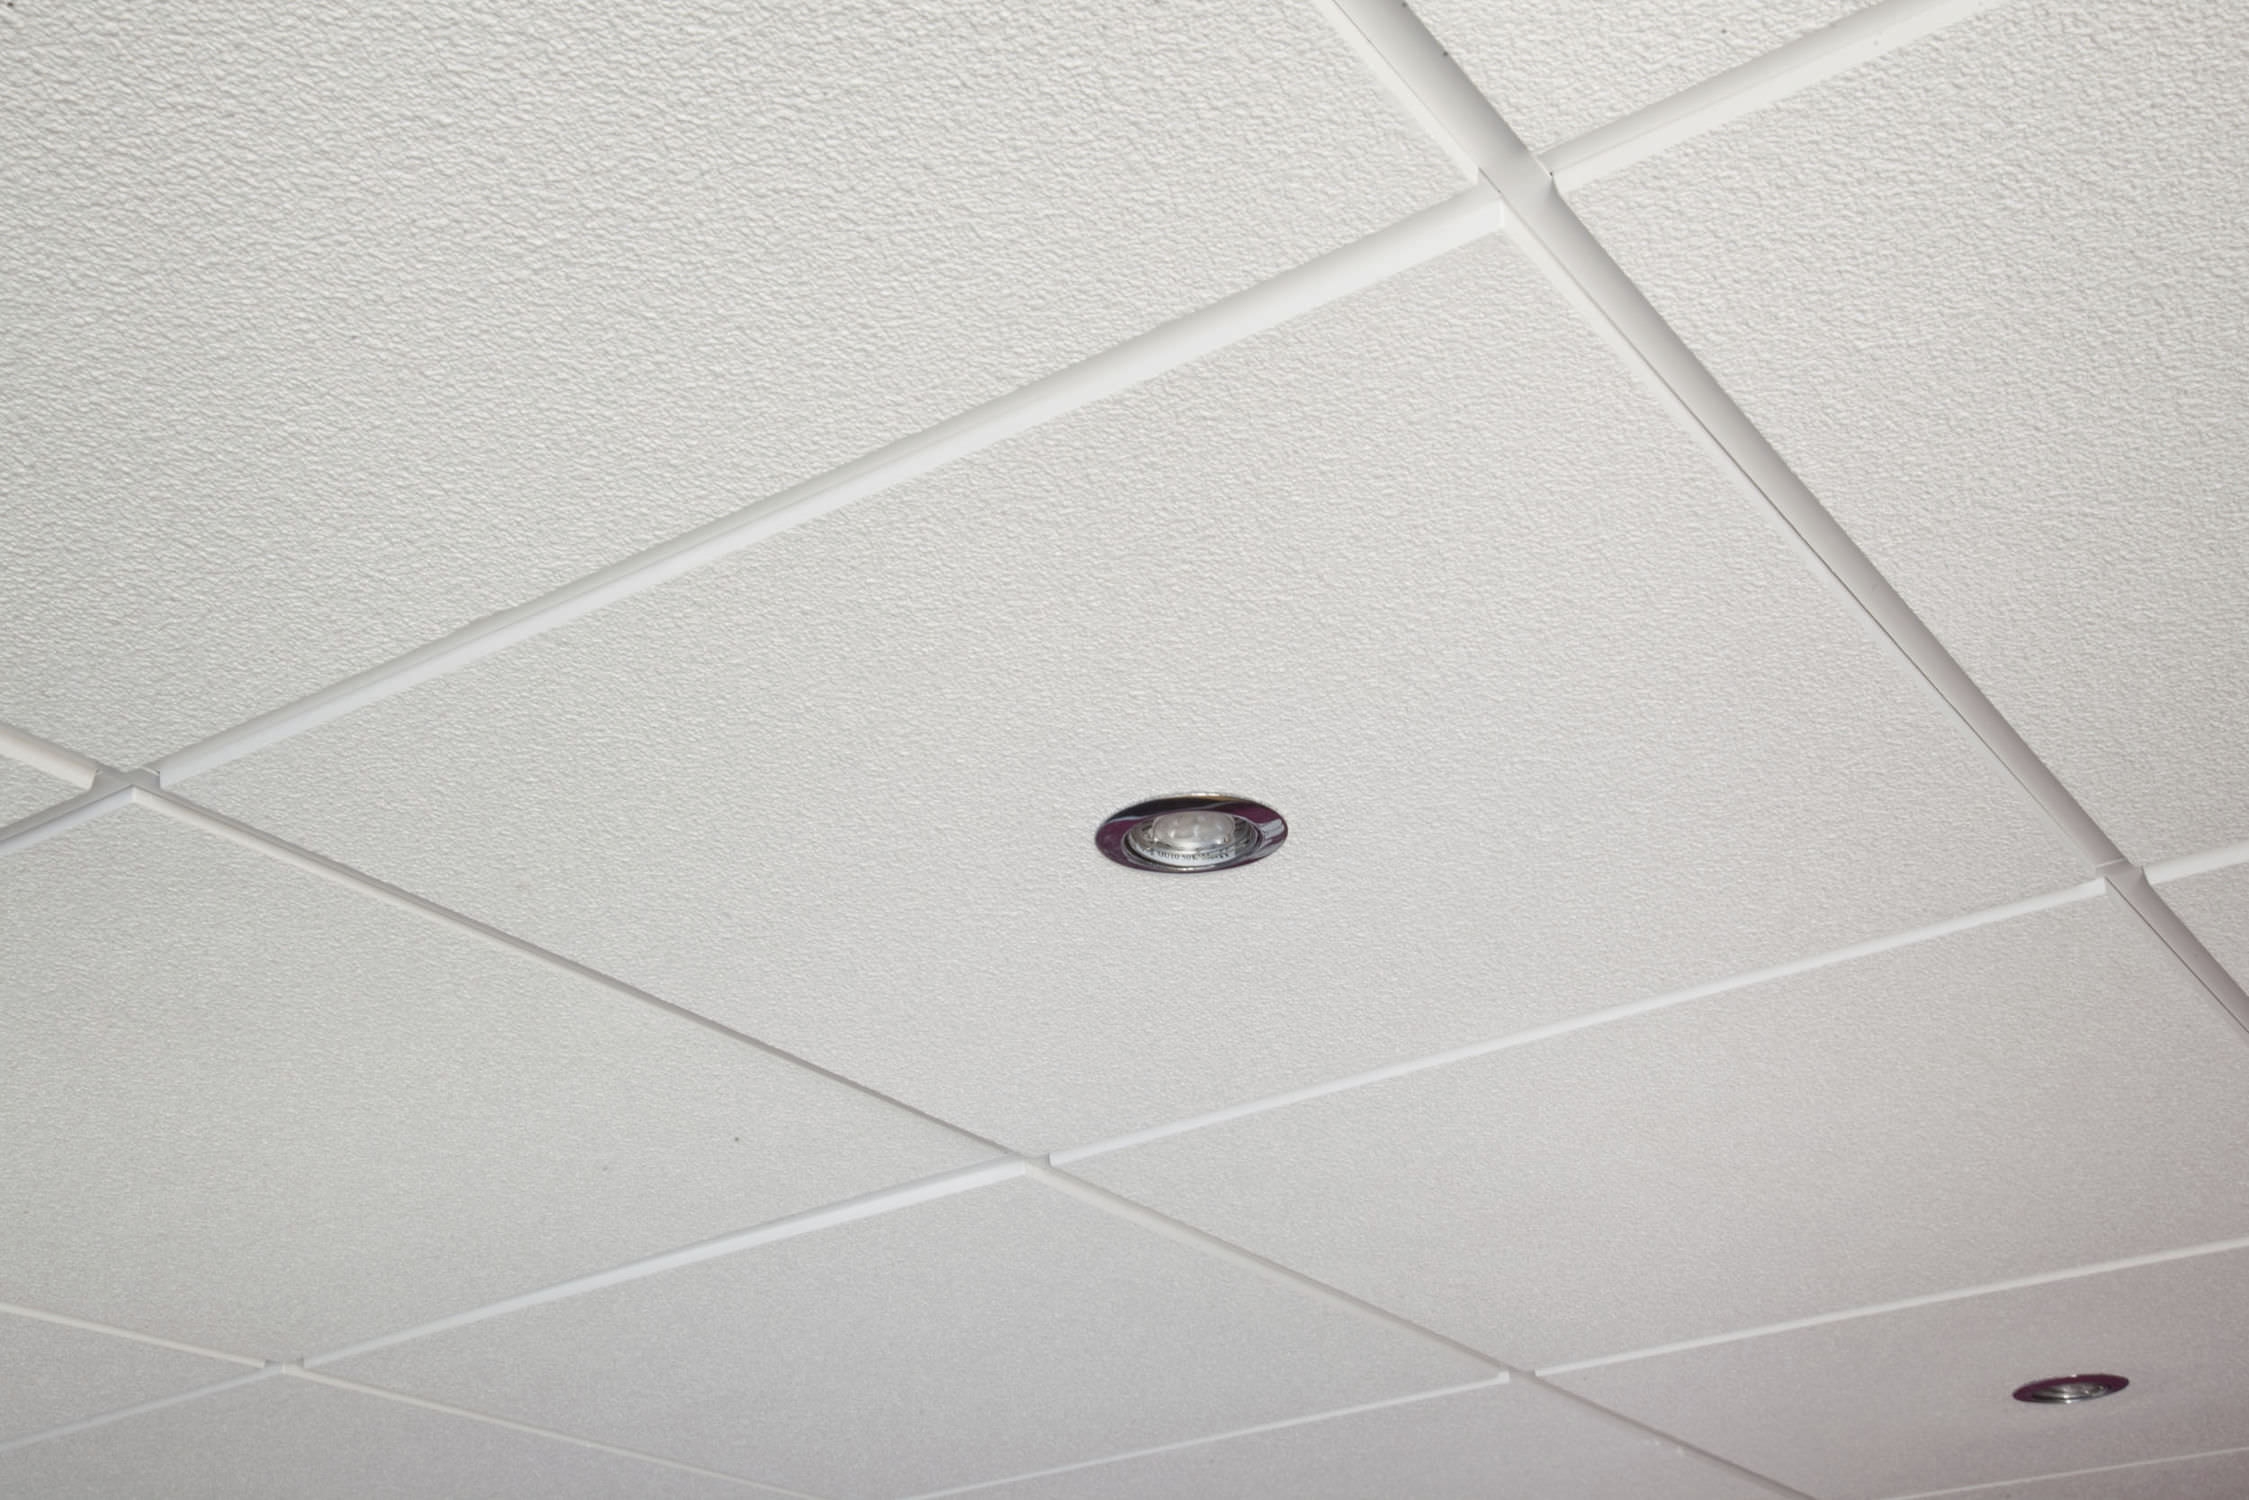 Permalink to Suspended Ceiling Tiles White